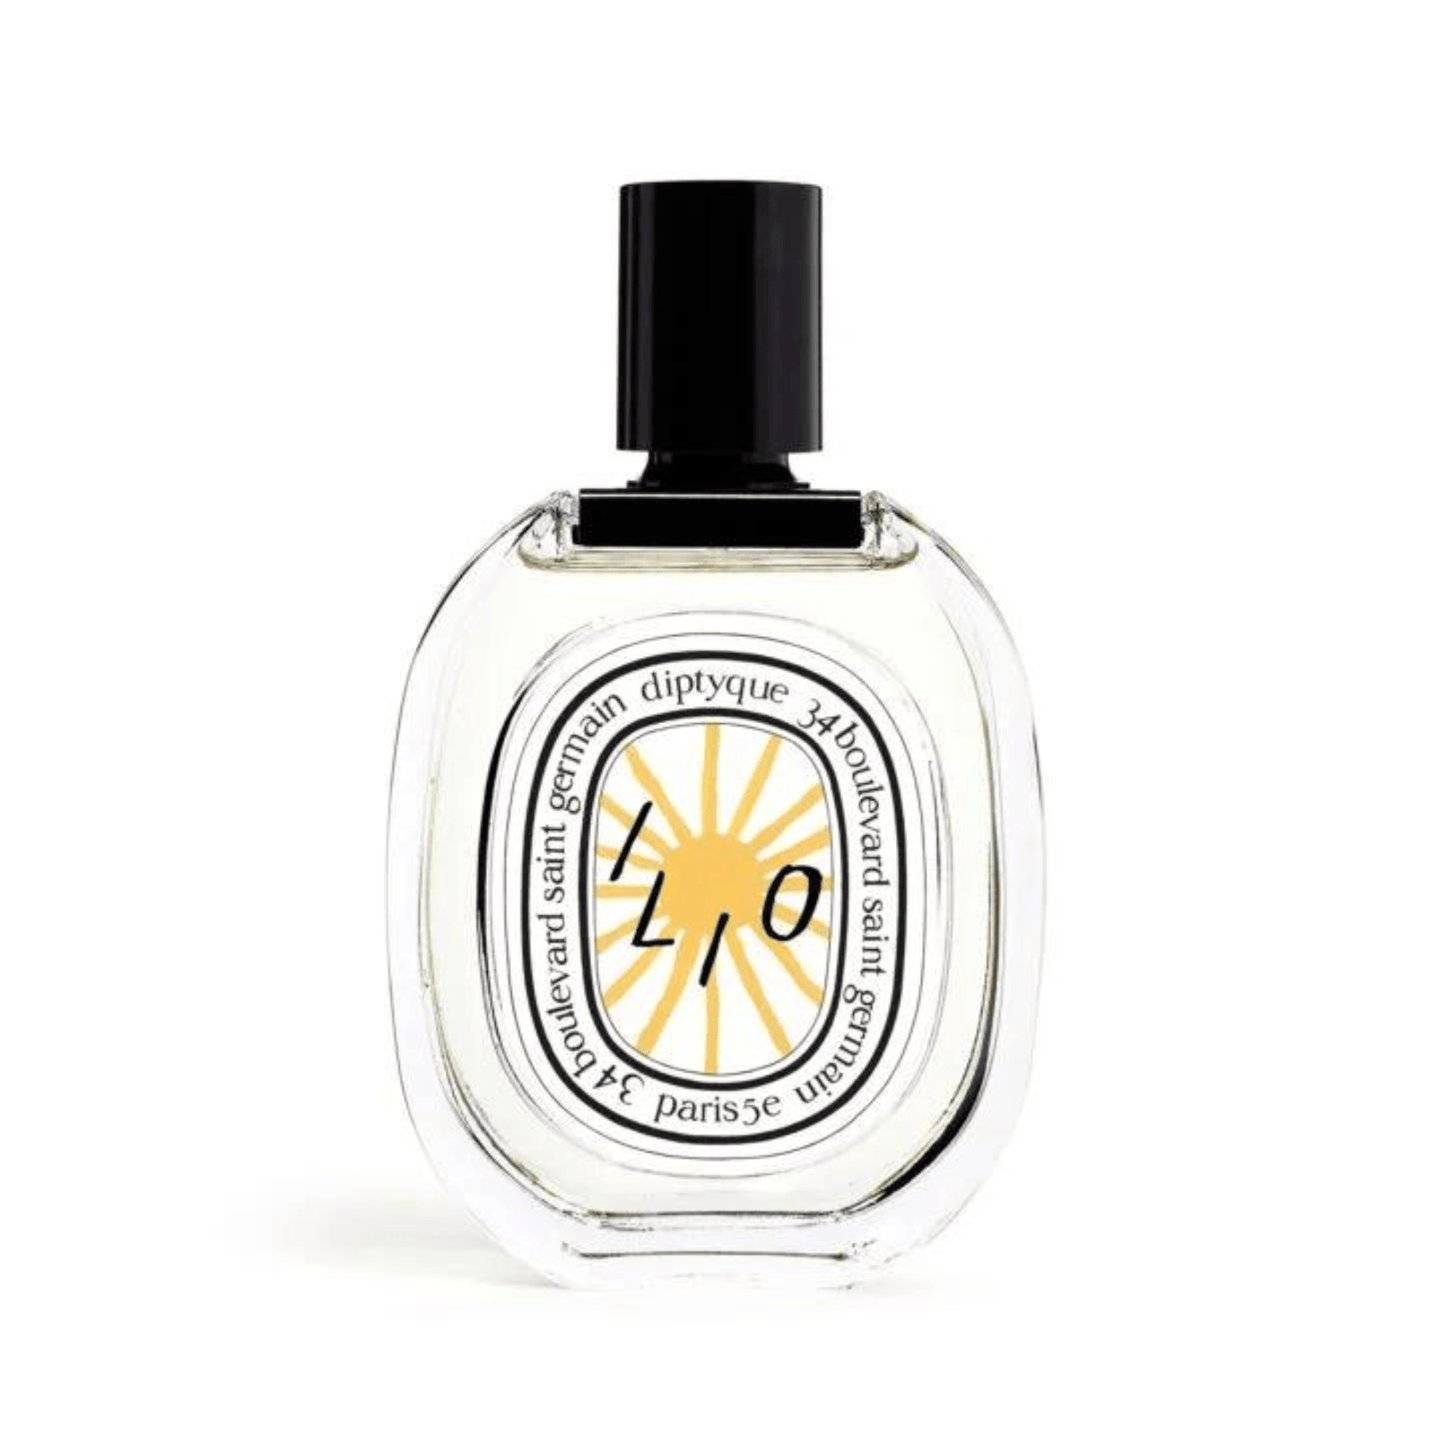 Primary Image of Limited Edition Ilio EDT